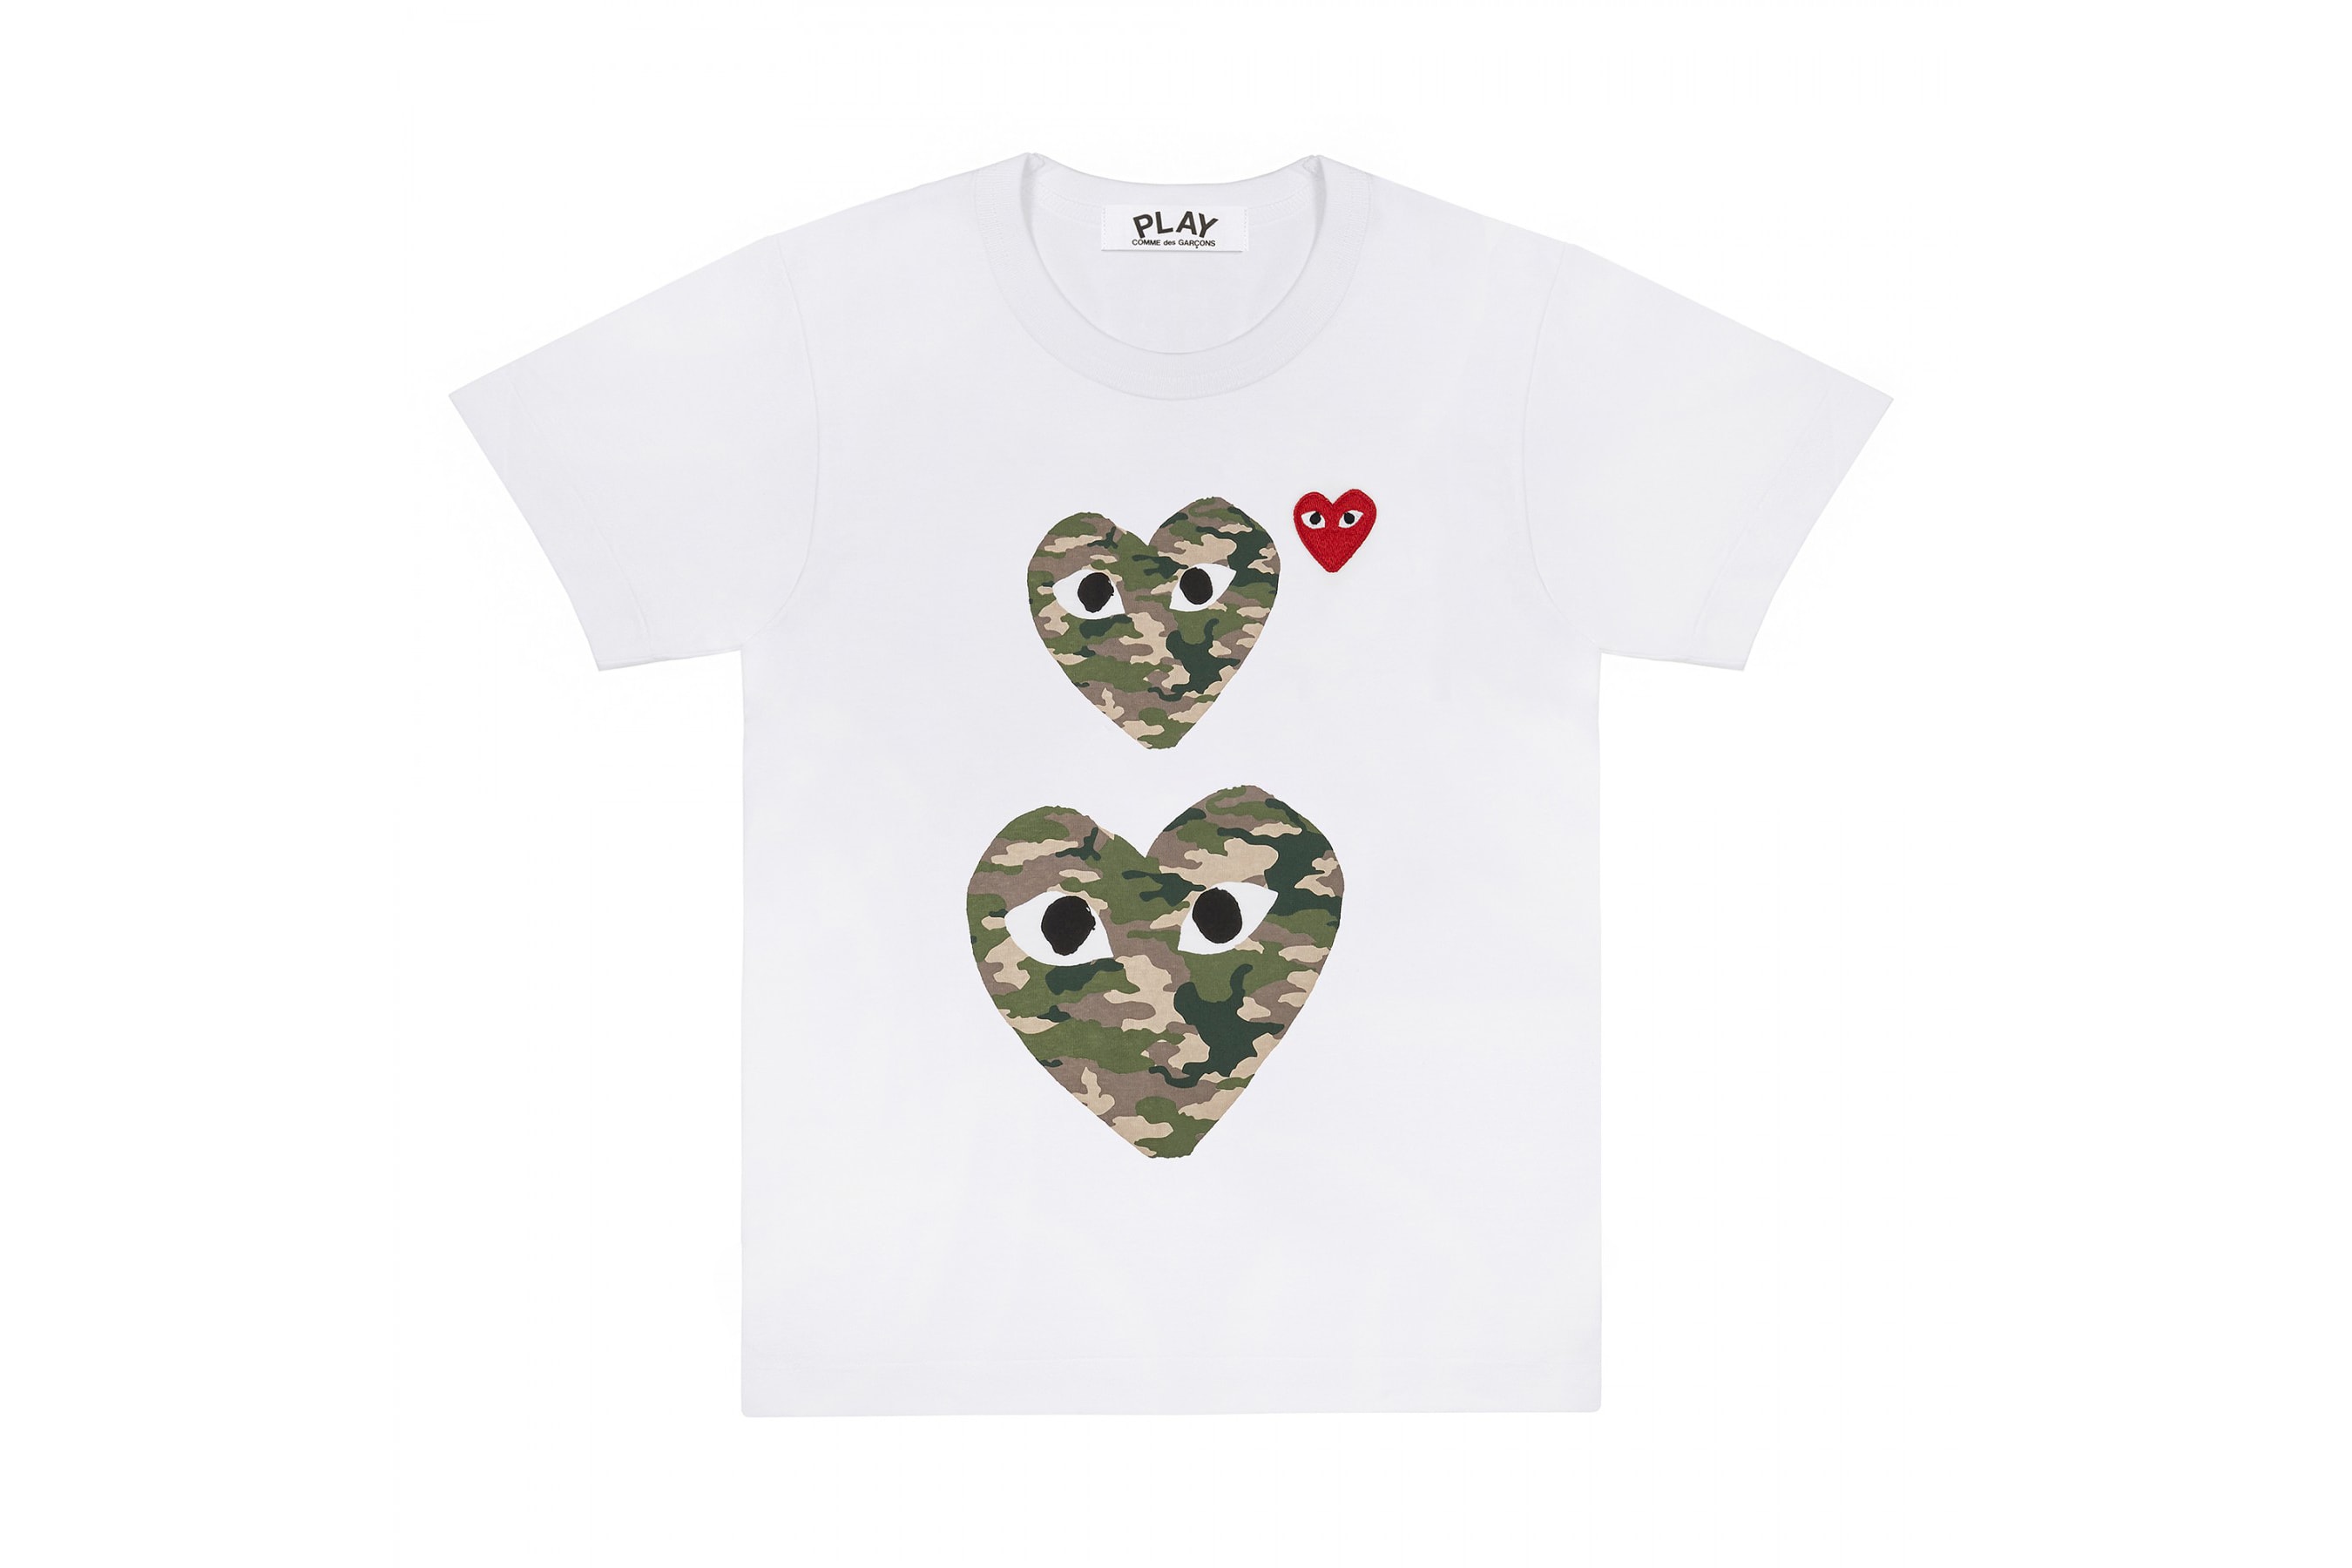 COMME des GARÇONS PLAY Camouflage T-shirts Dover Street Market Where To Buy Heart Logo